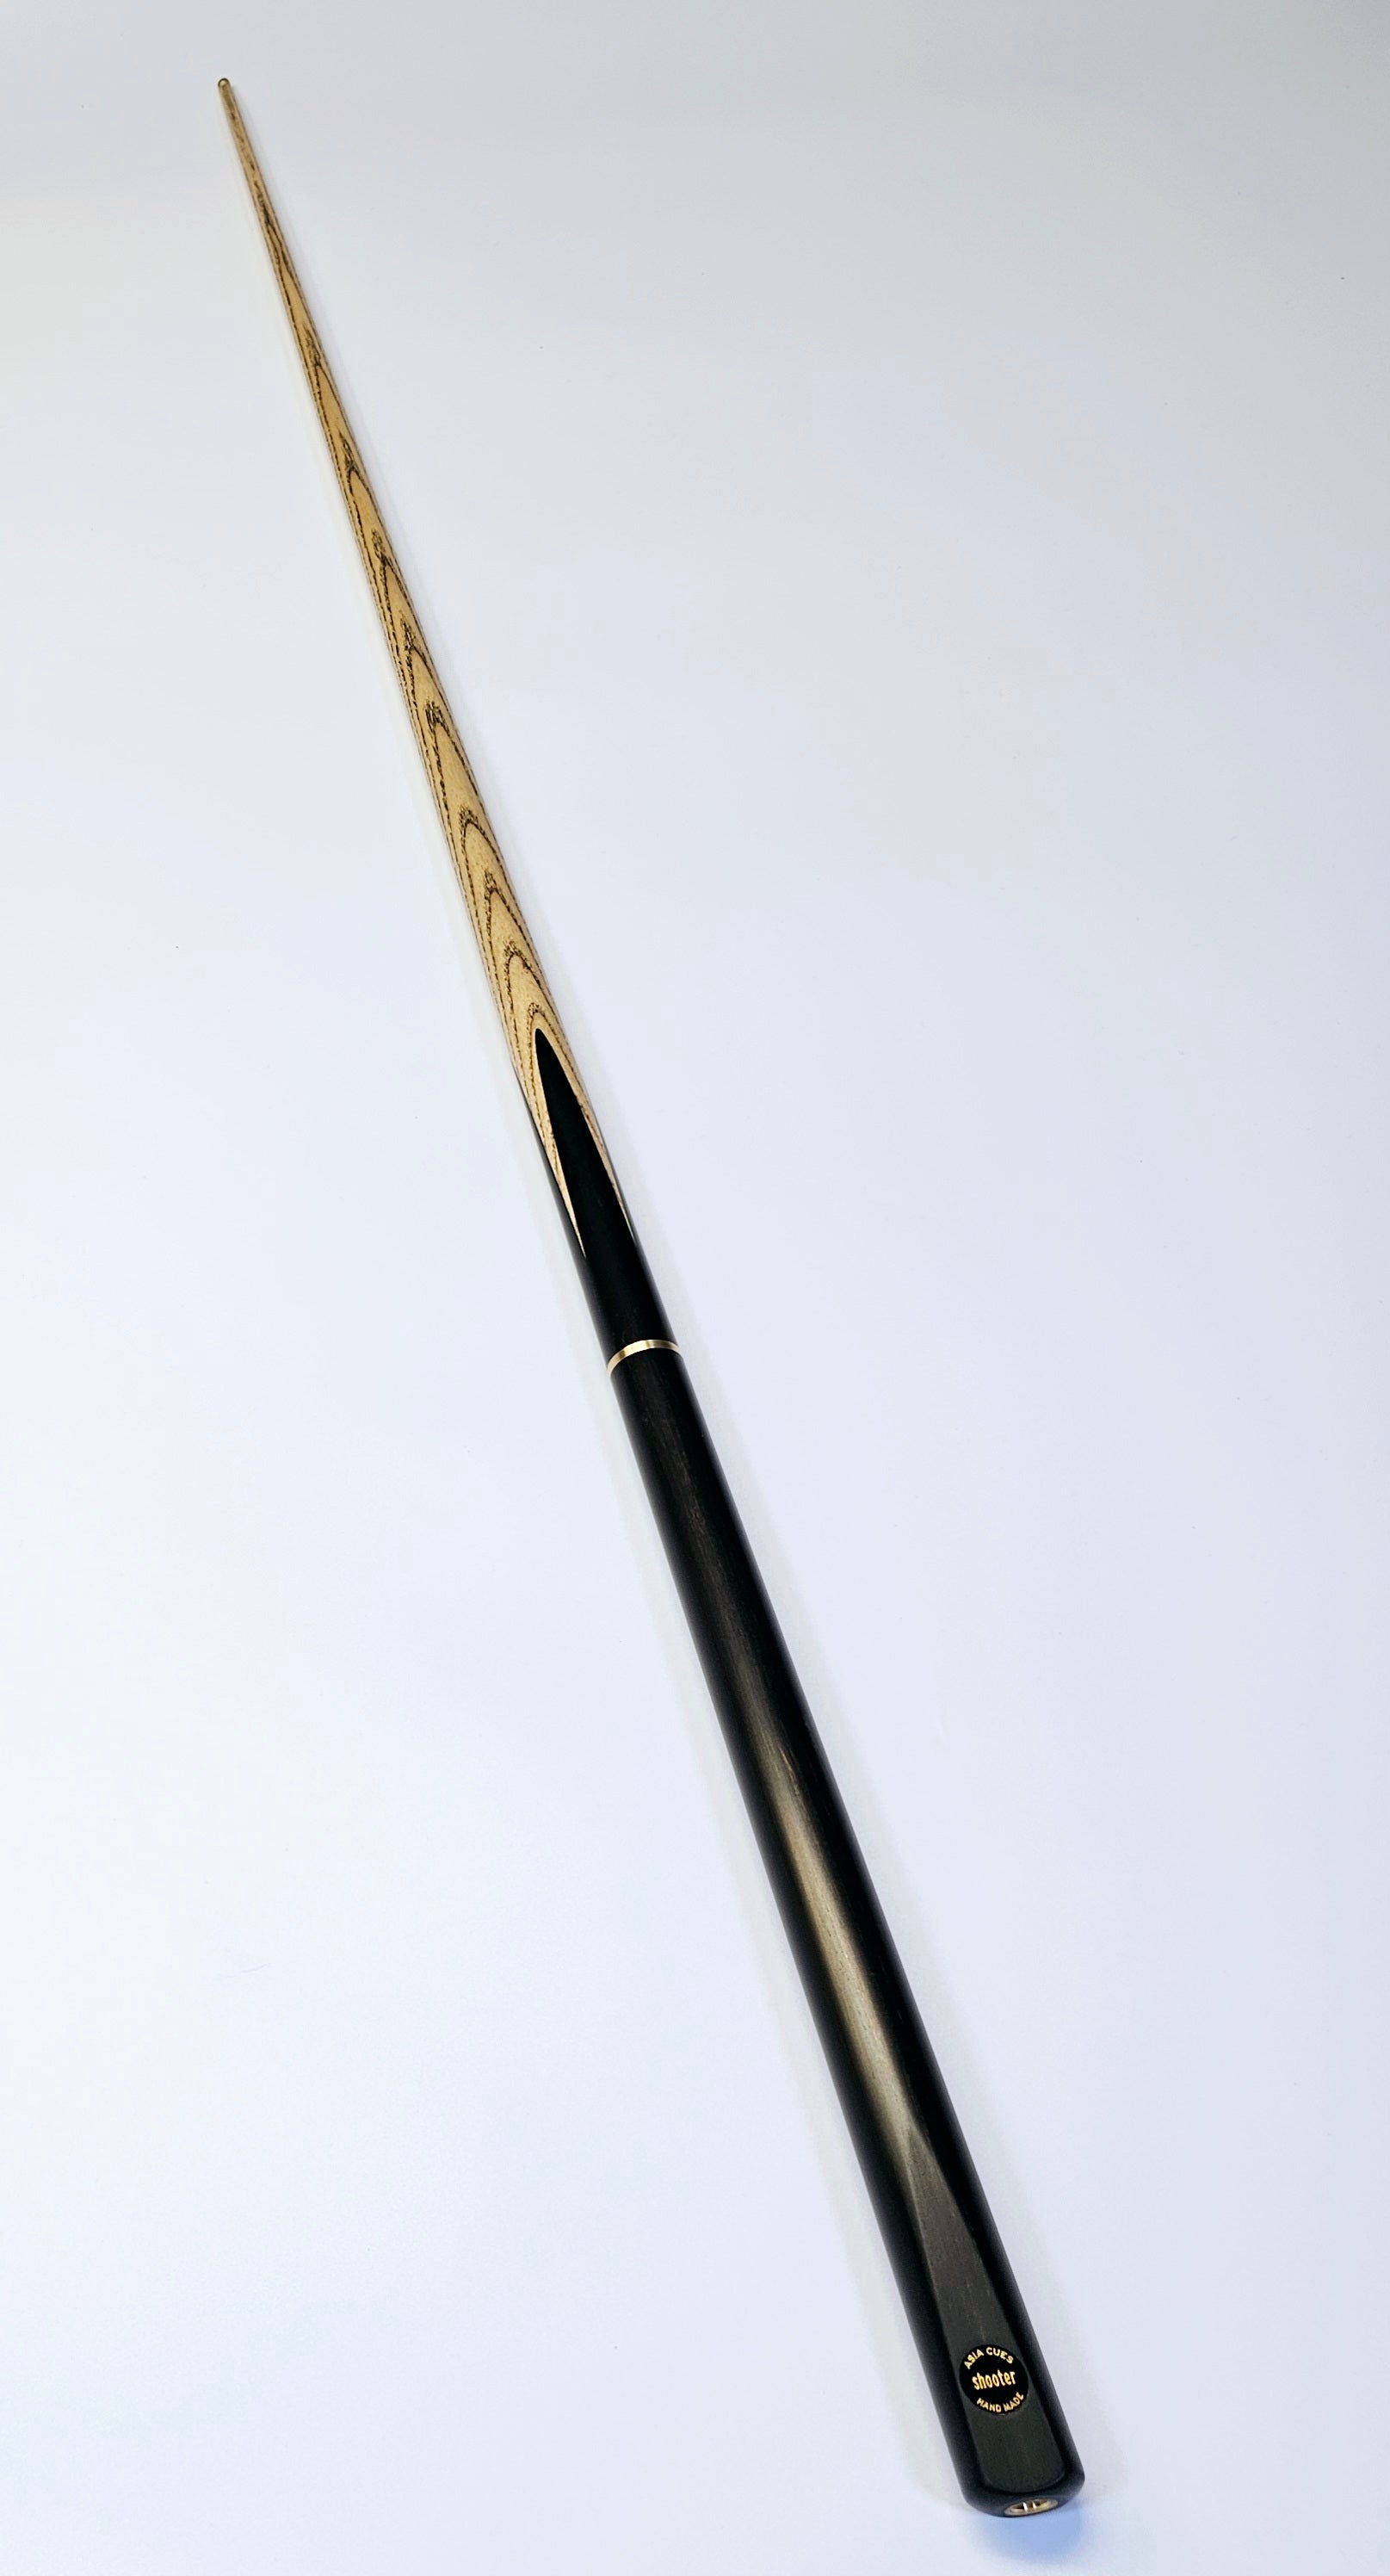 Asia Cues Shooter - 3/4 Jointed Pool Cue 8.6mm Tip, 17.3oz, 57"